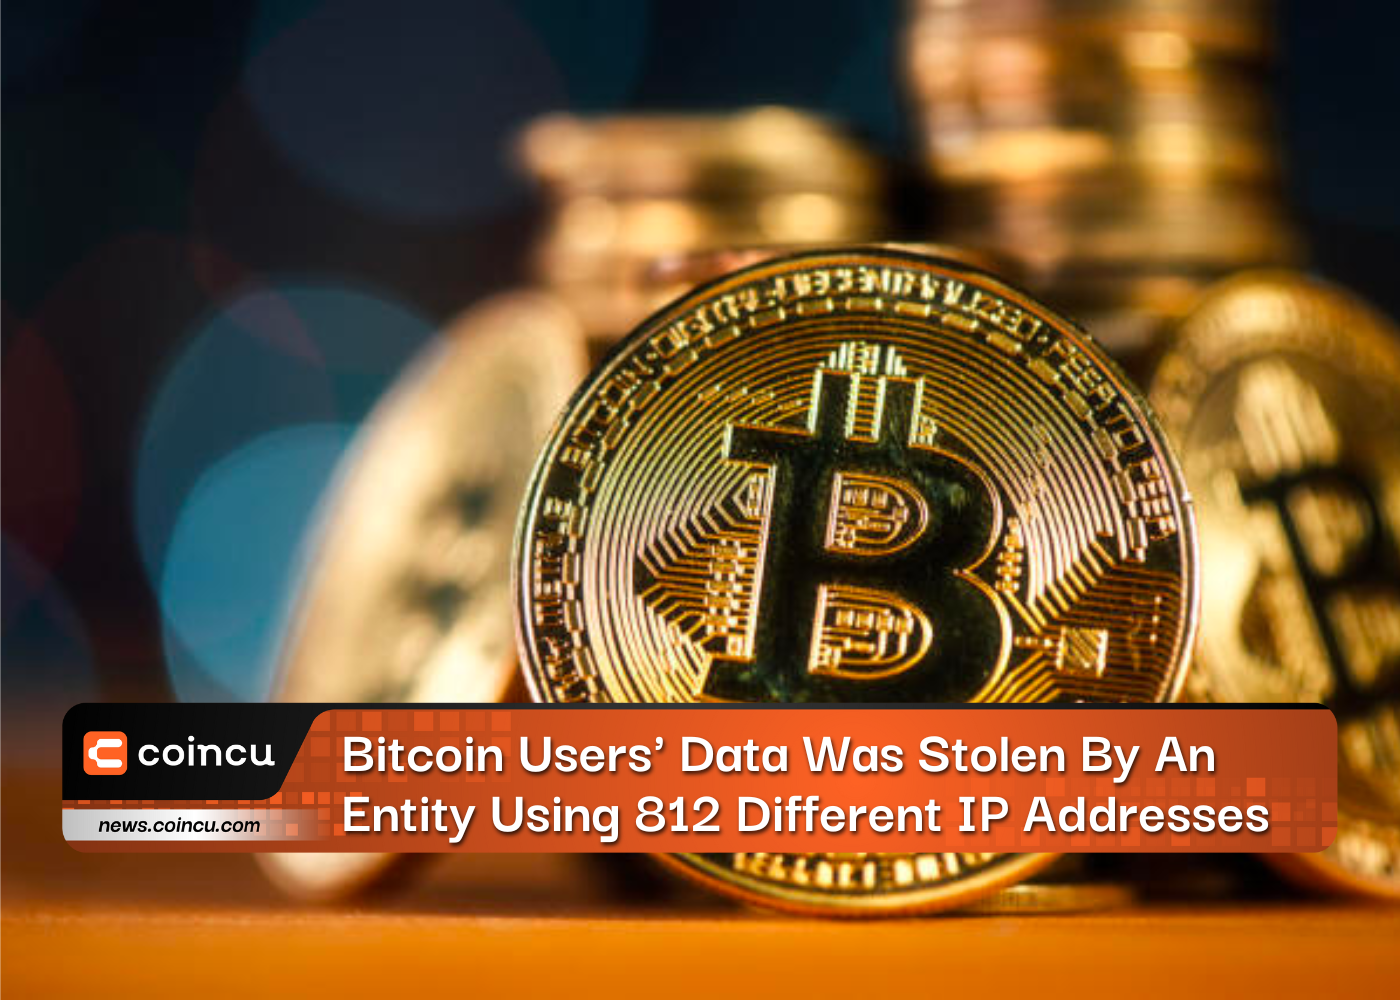 Bitcoin Users' Data Was Stolen By An Entity Using 812 Different IP Addresses